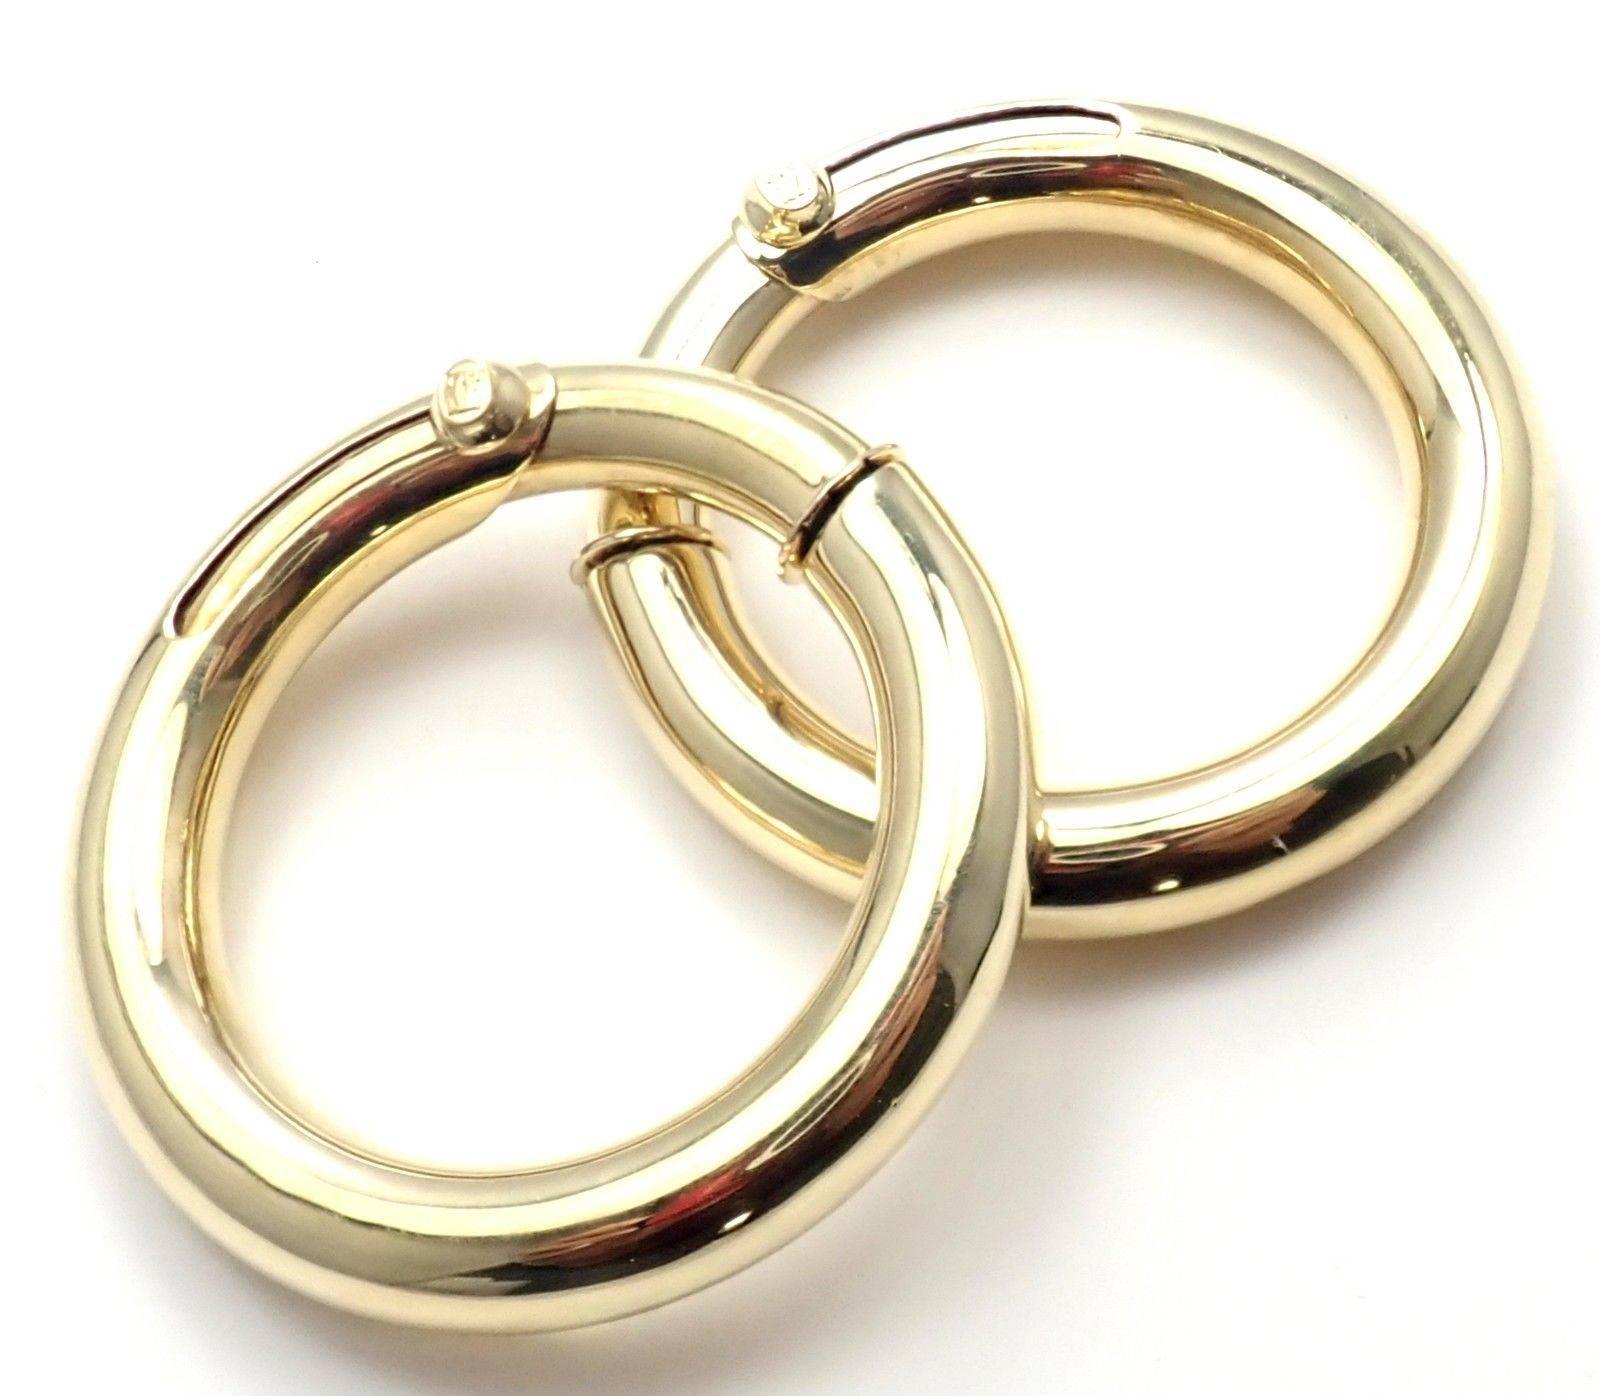 18k Yellow Gold Large Hoop Earrings by Cartier. 
These earrings are for pierced ears. 
Details: 
Weight: 21 grams
Measurements: 41mm
Stamped Hallmarks: Cartier 750 B0920 Double C
*Free Shipping within the United States* 
YOUR PRICE: $4,500
T1809odad